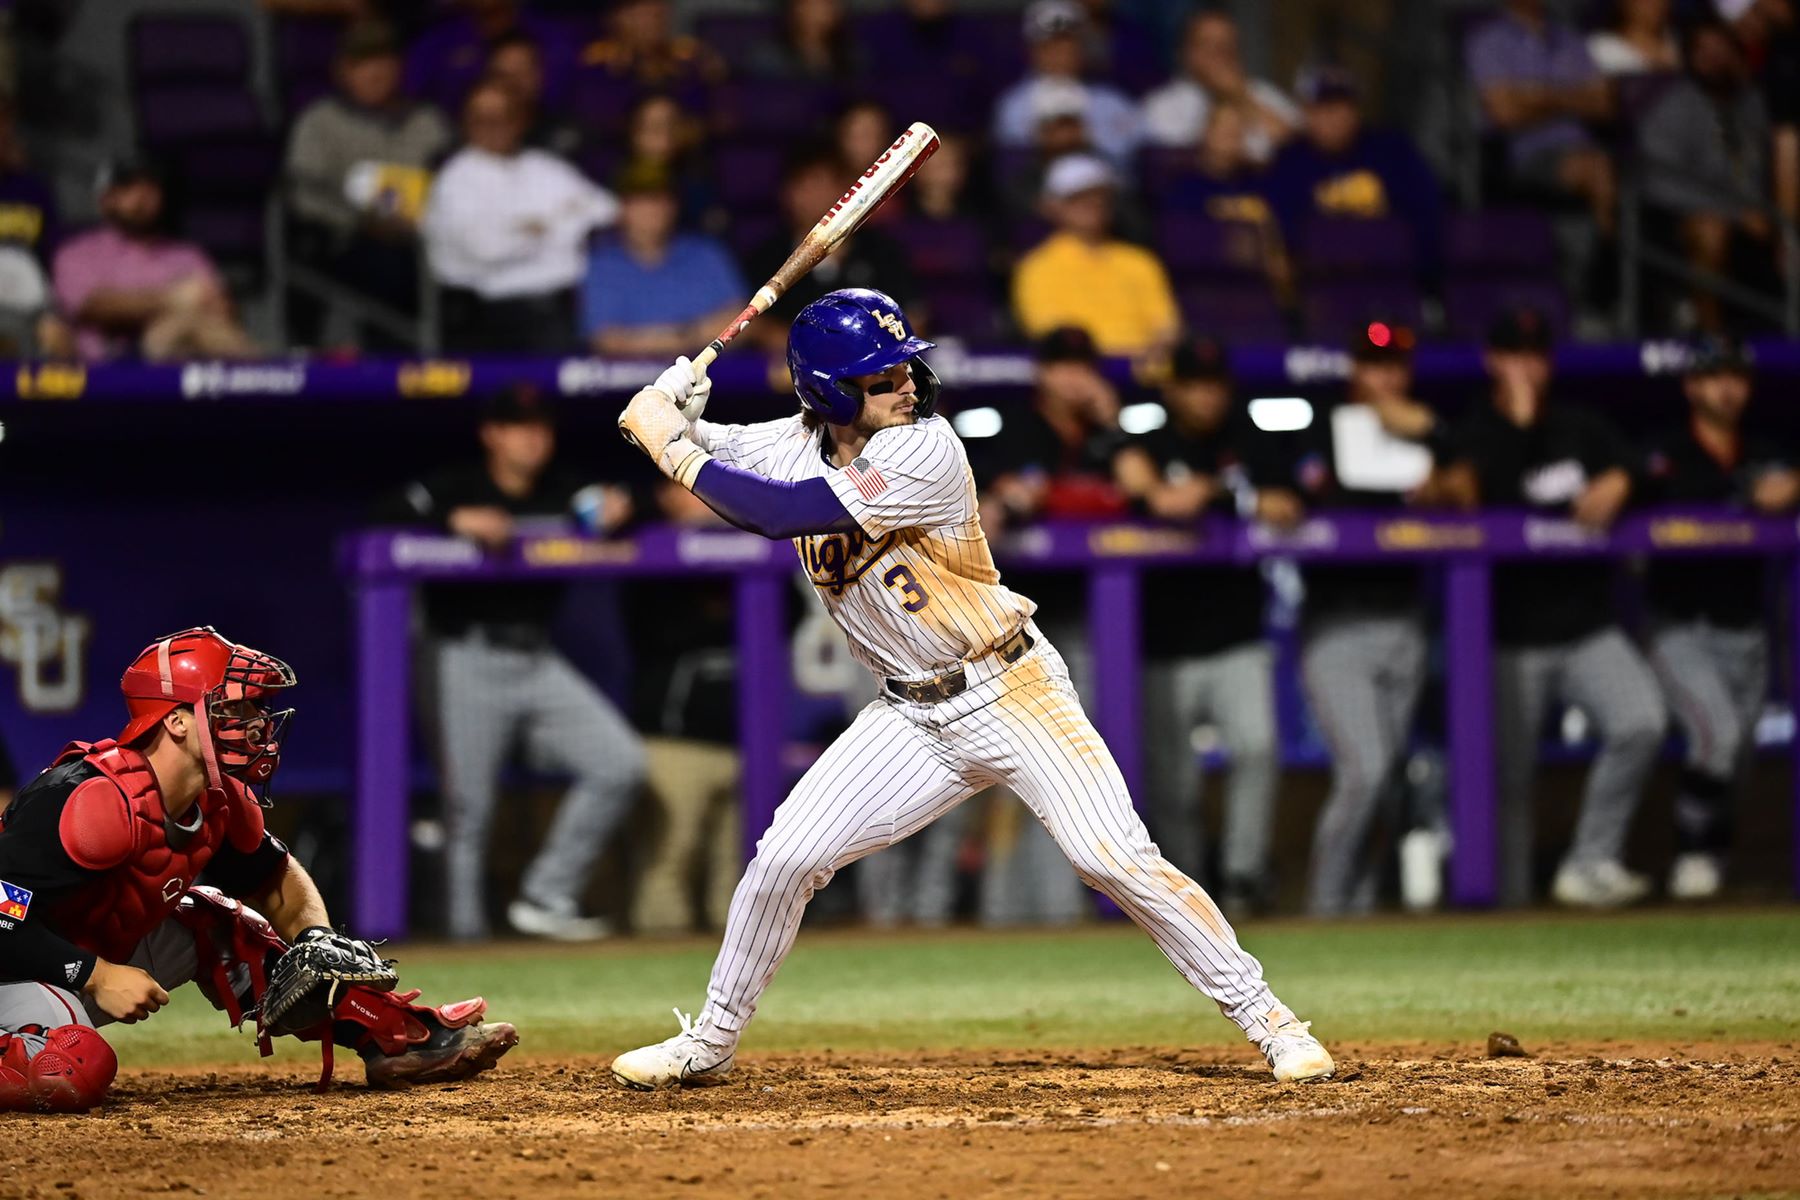 How To Watch LSU Baseball Game Today